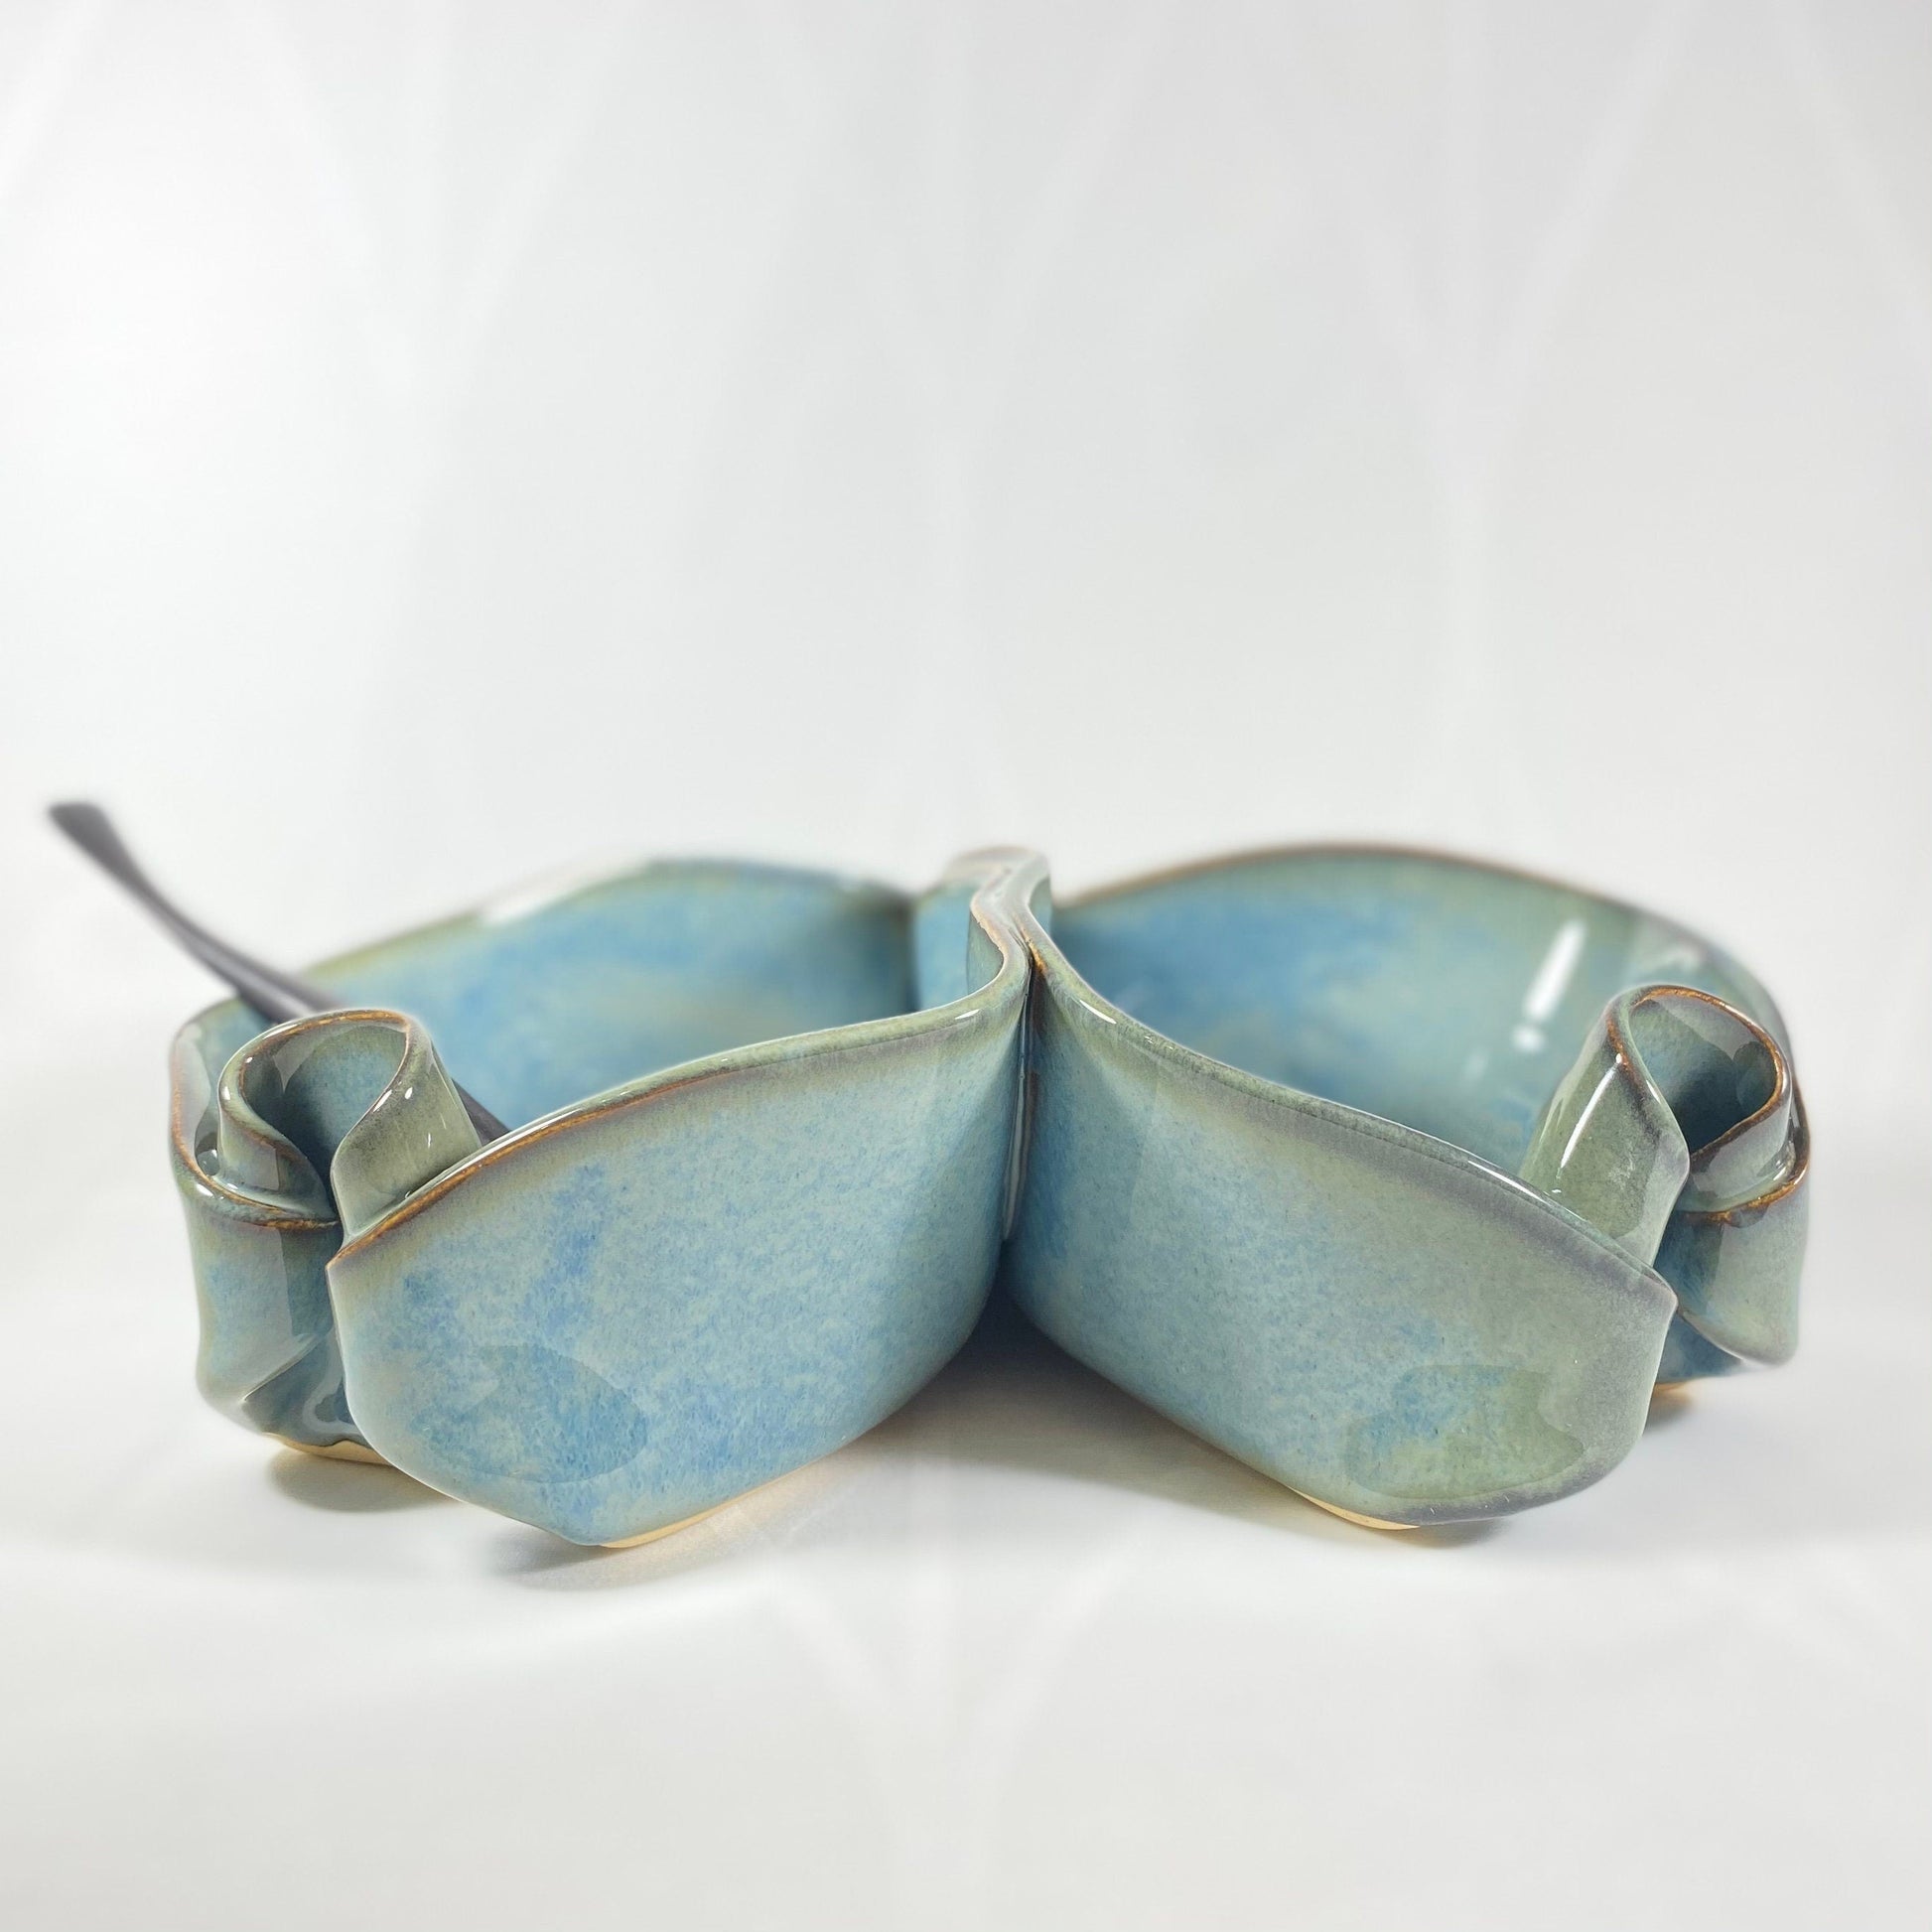 Handmade Light Blue Double Sided Bowl with Serving Spoon, Functional and Decorative Pottery